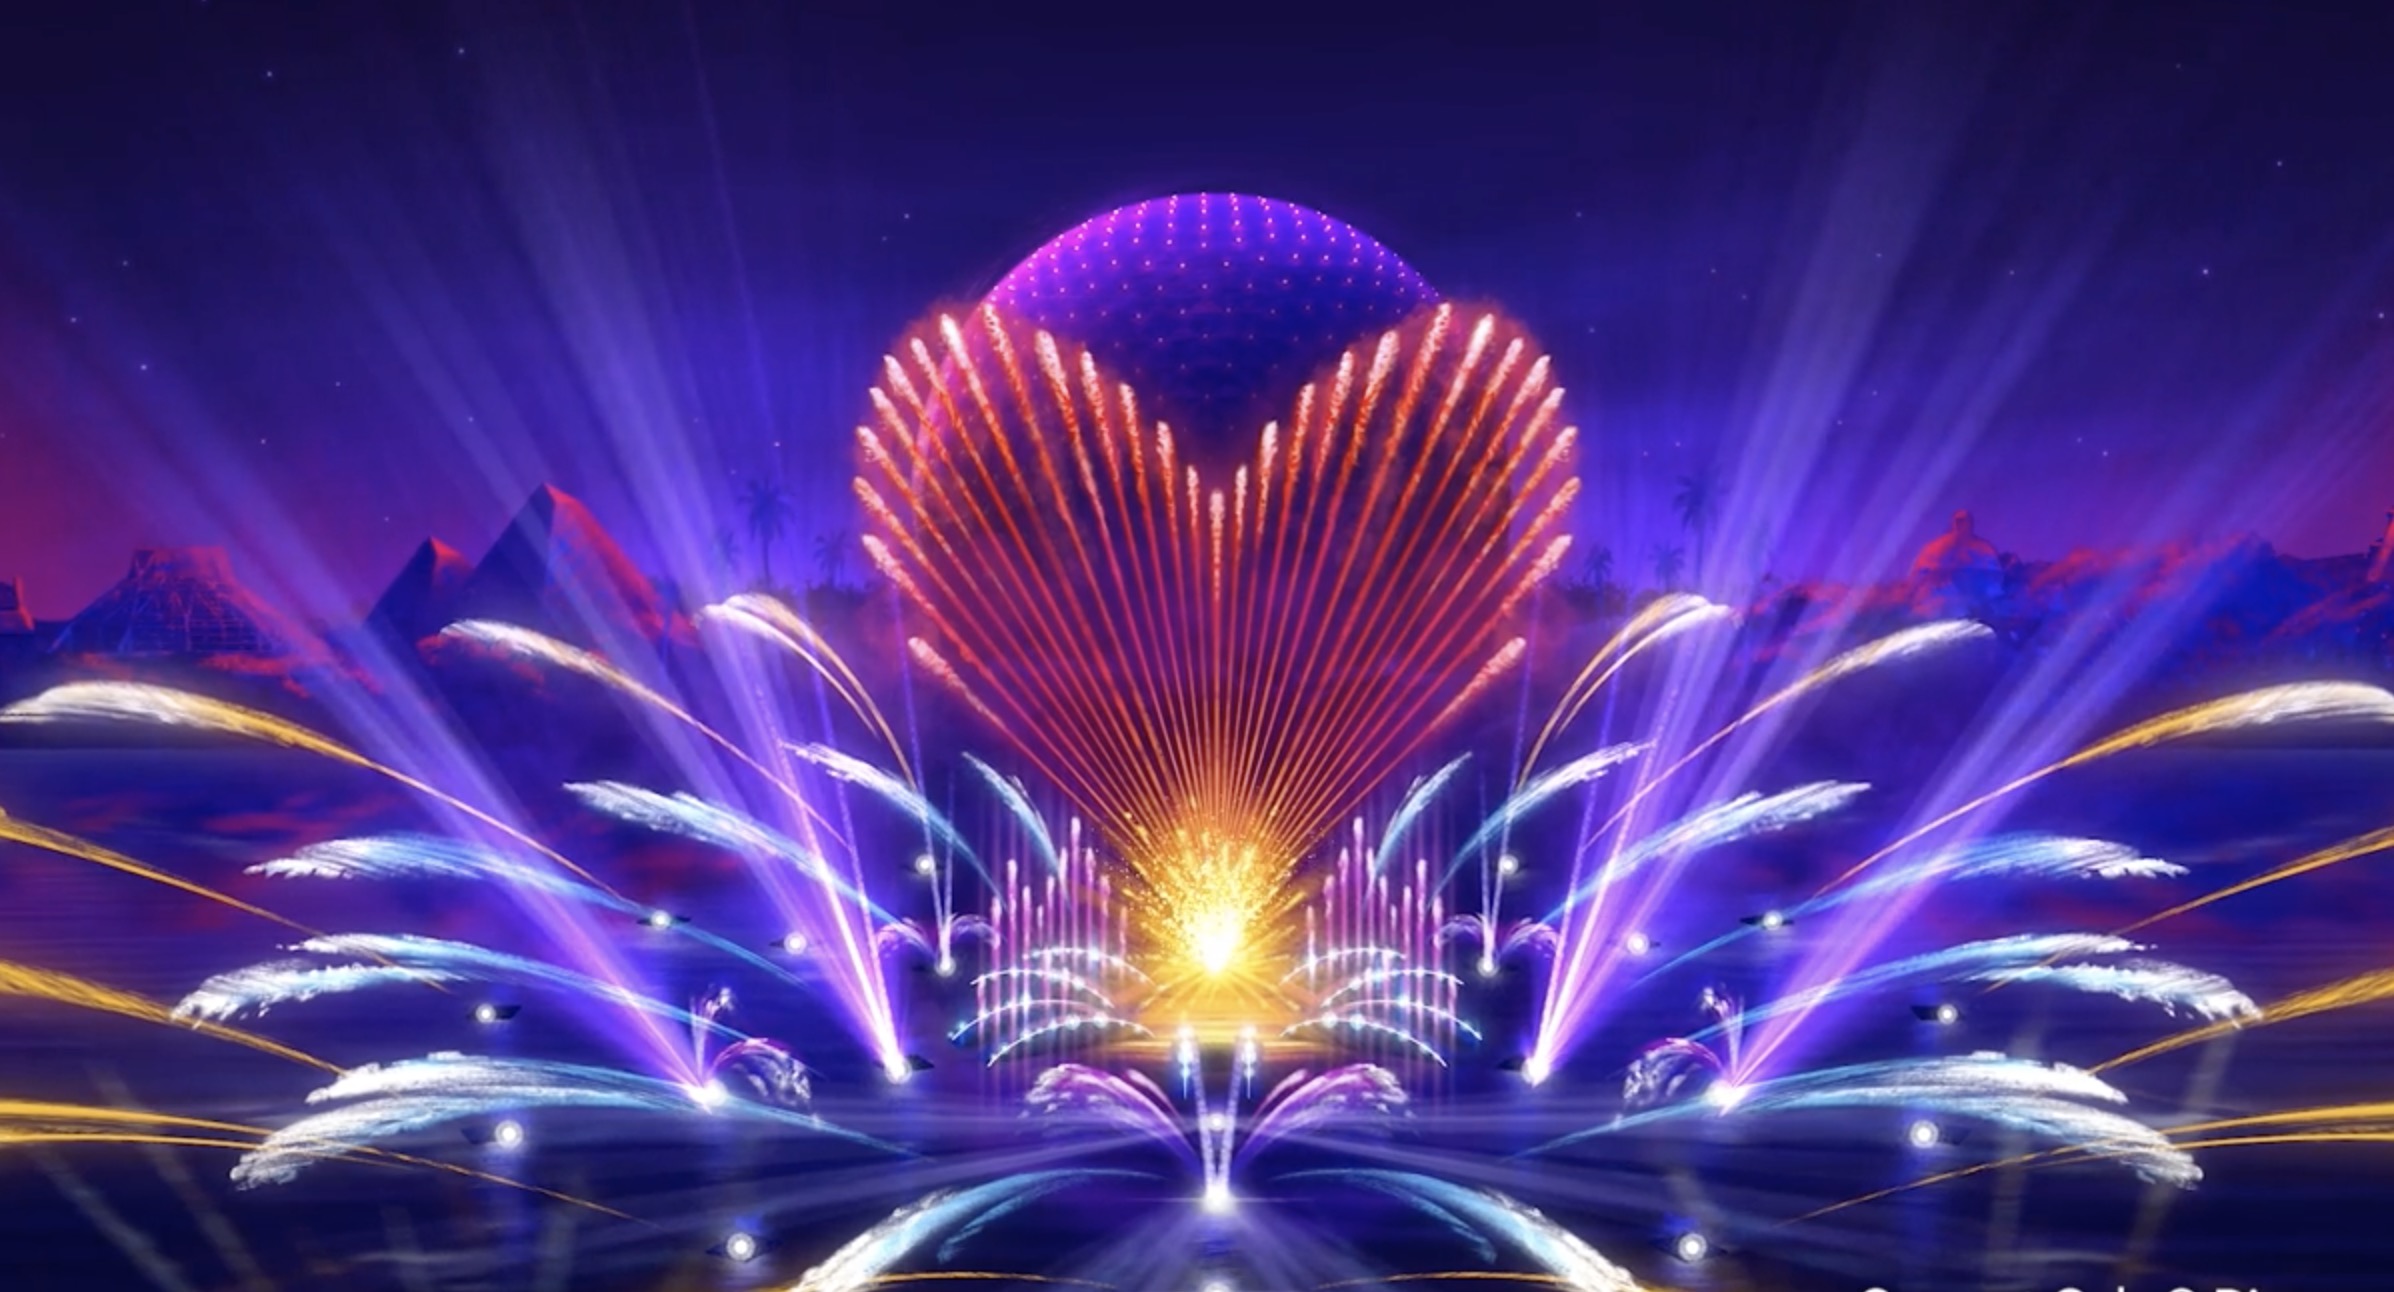 BREAKING: Concept Art Revealed For New EPCOT Nighttime Spectacular -  MickeyBlog.com